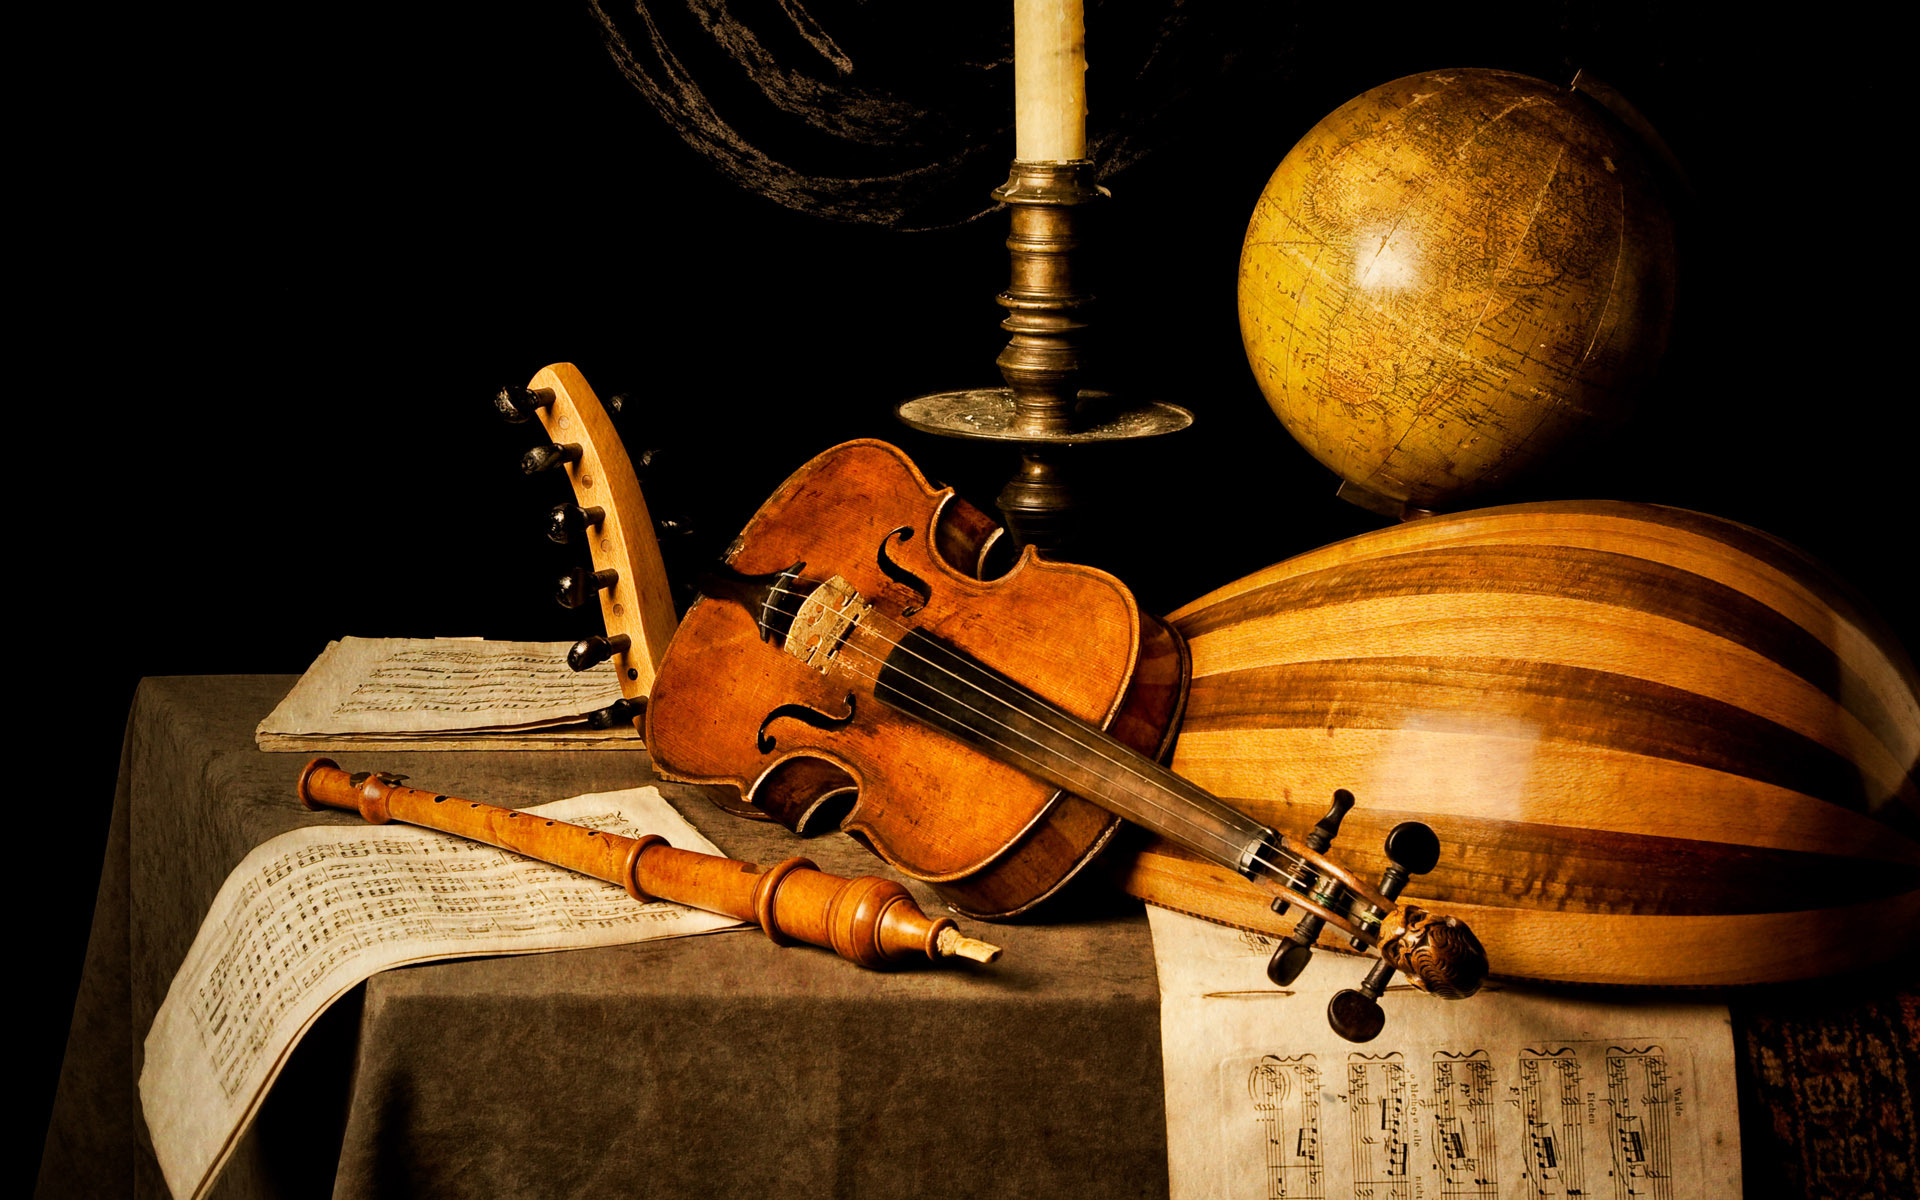 Old Musical Instruments Wallpapers High Quality | Download Free